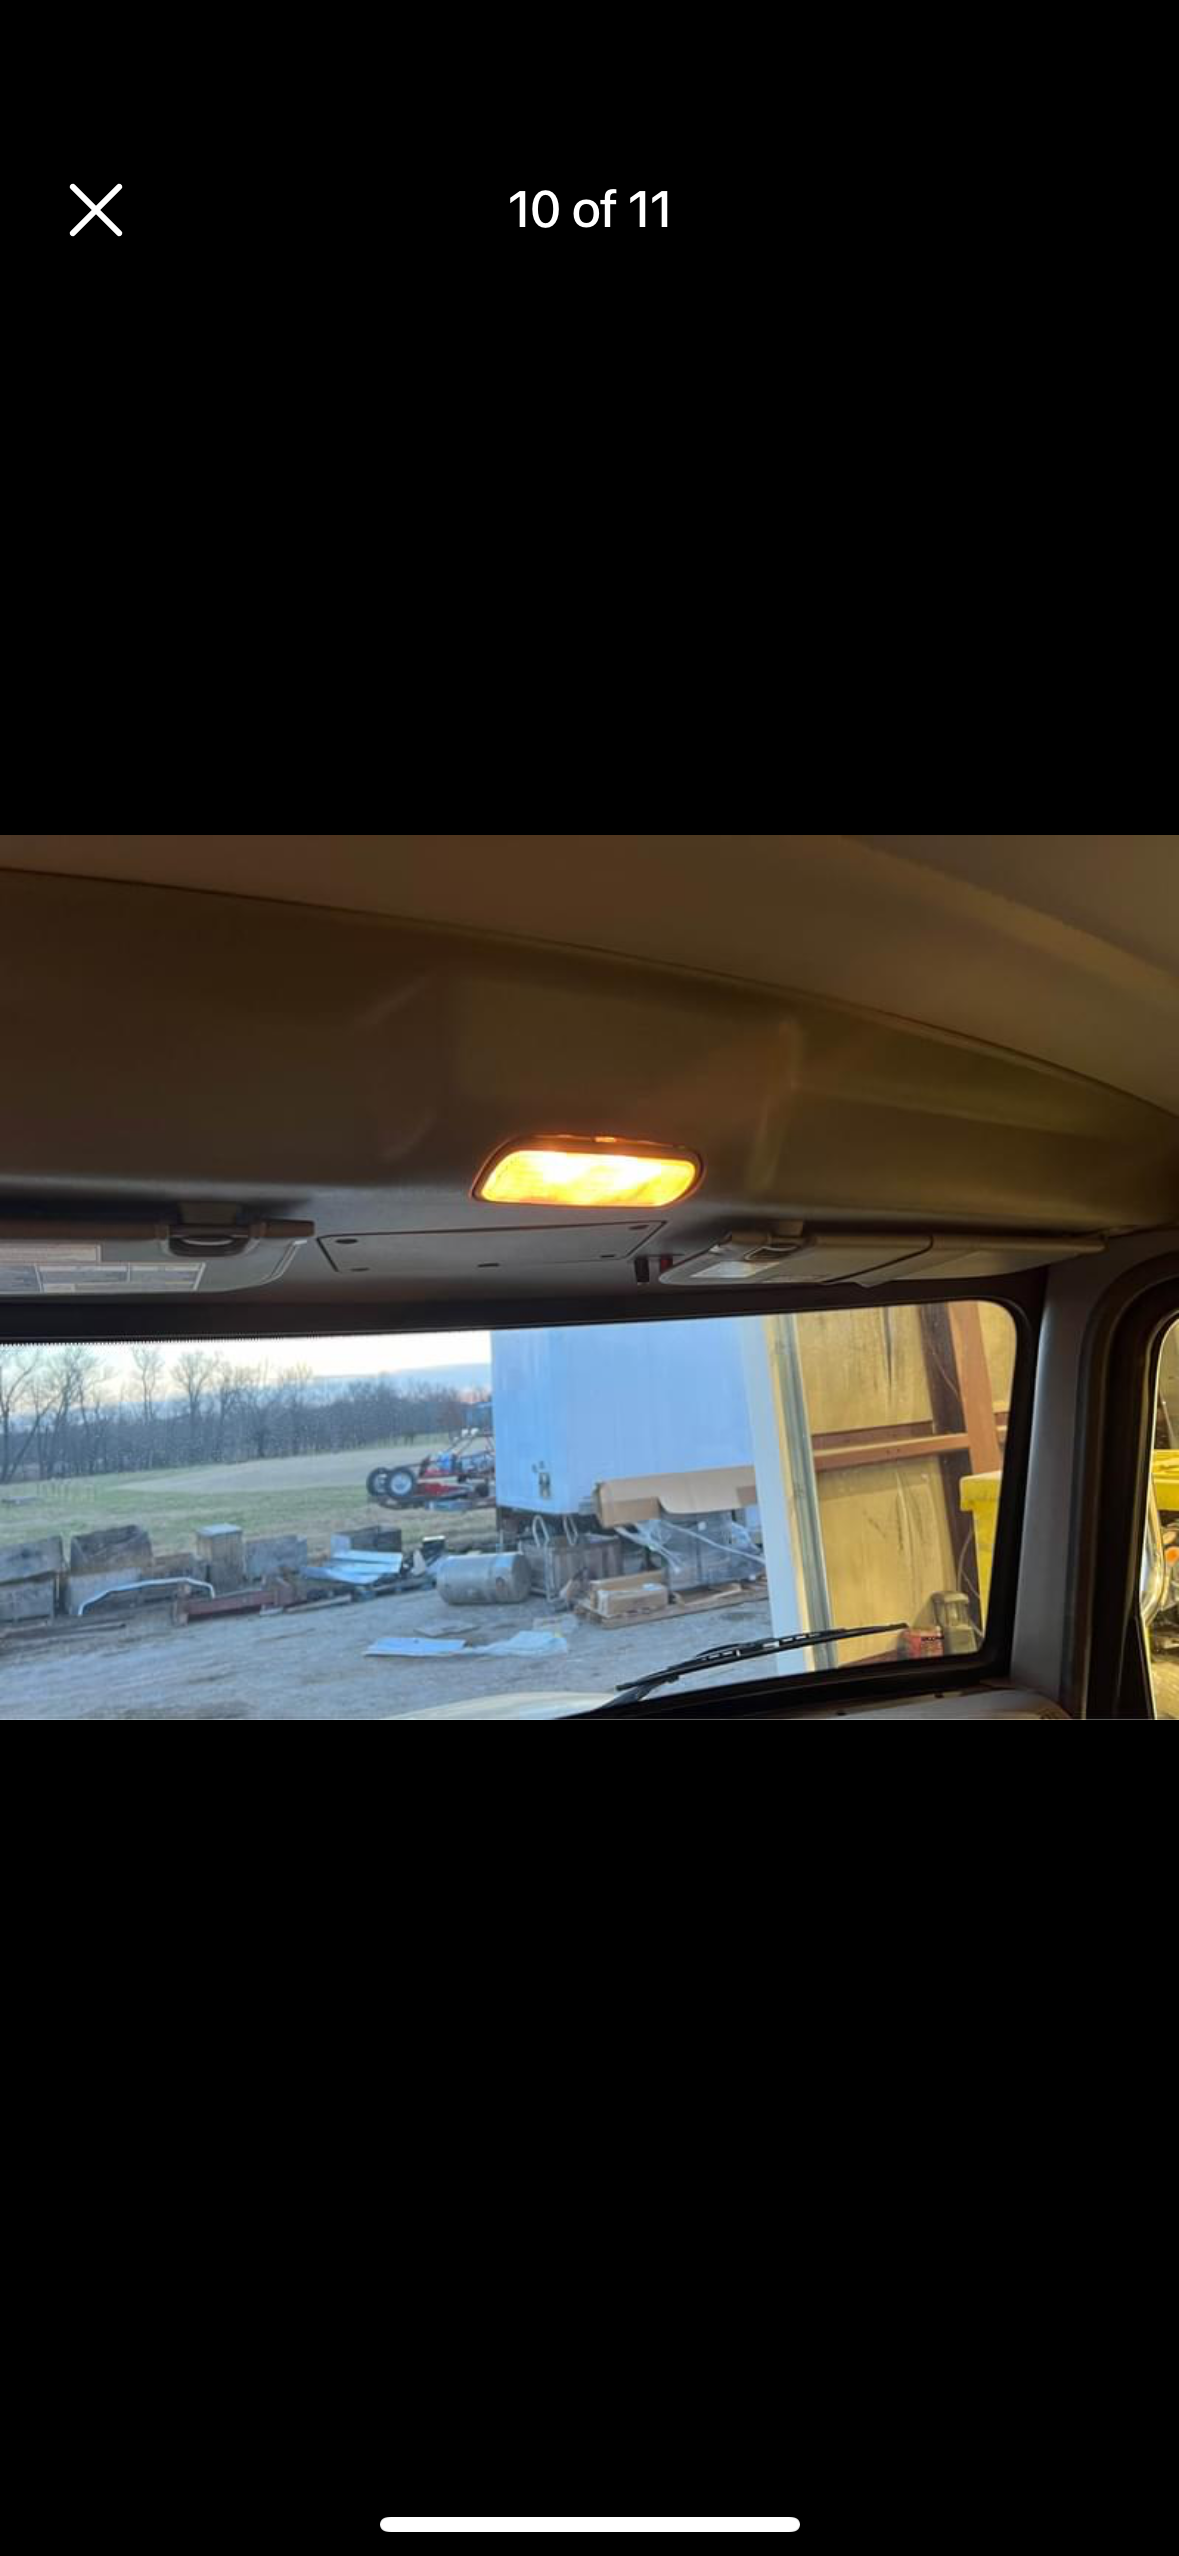 A picture of the inside of a car with a roof light on.